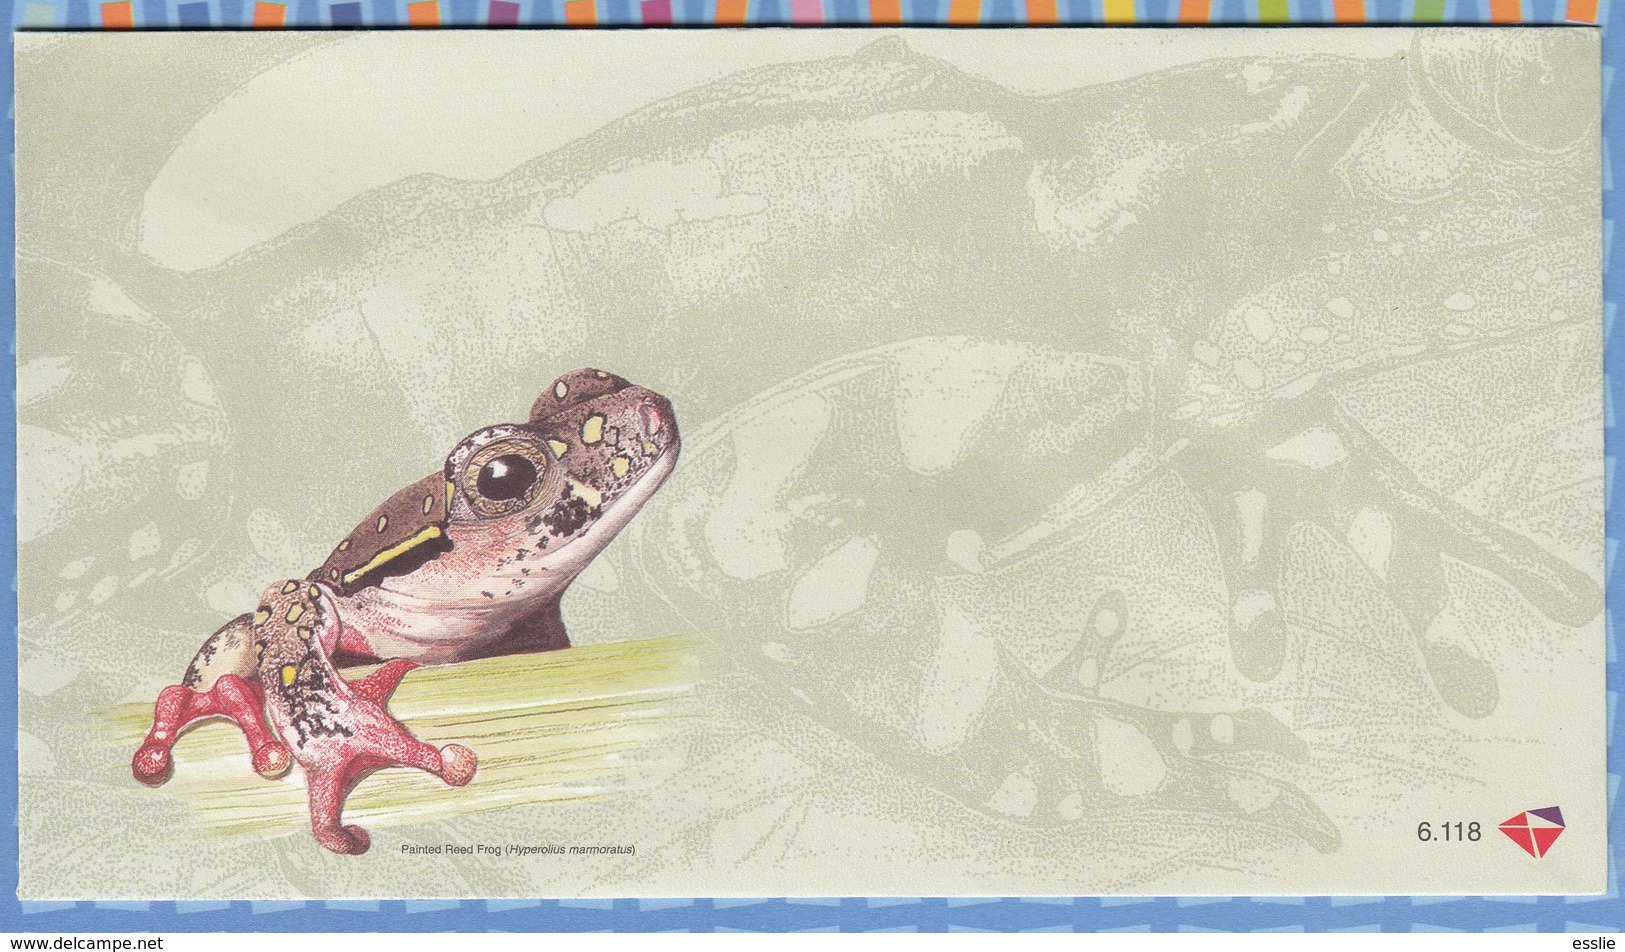 South Africa RSA - 2000 - FDC 6.118 Frogs Of SA  - Unserviced Cover - Covers & Documents